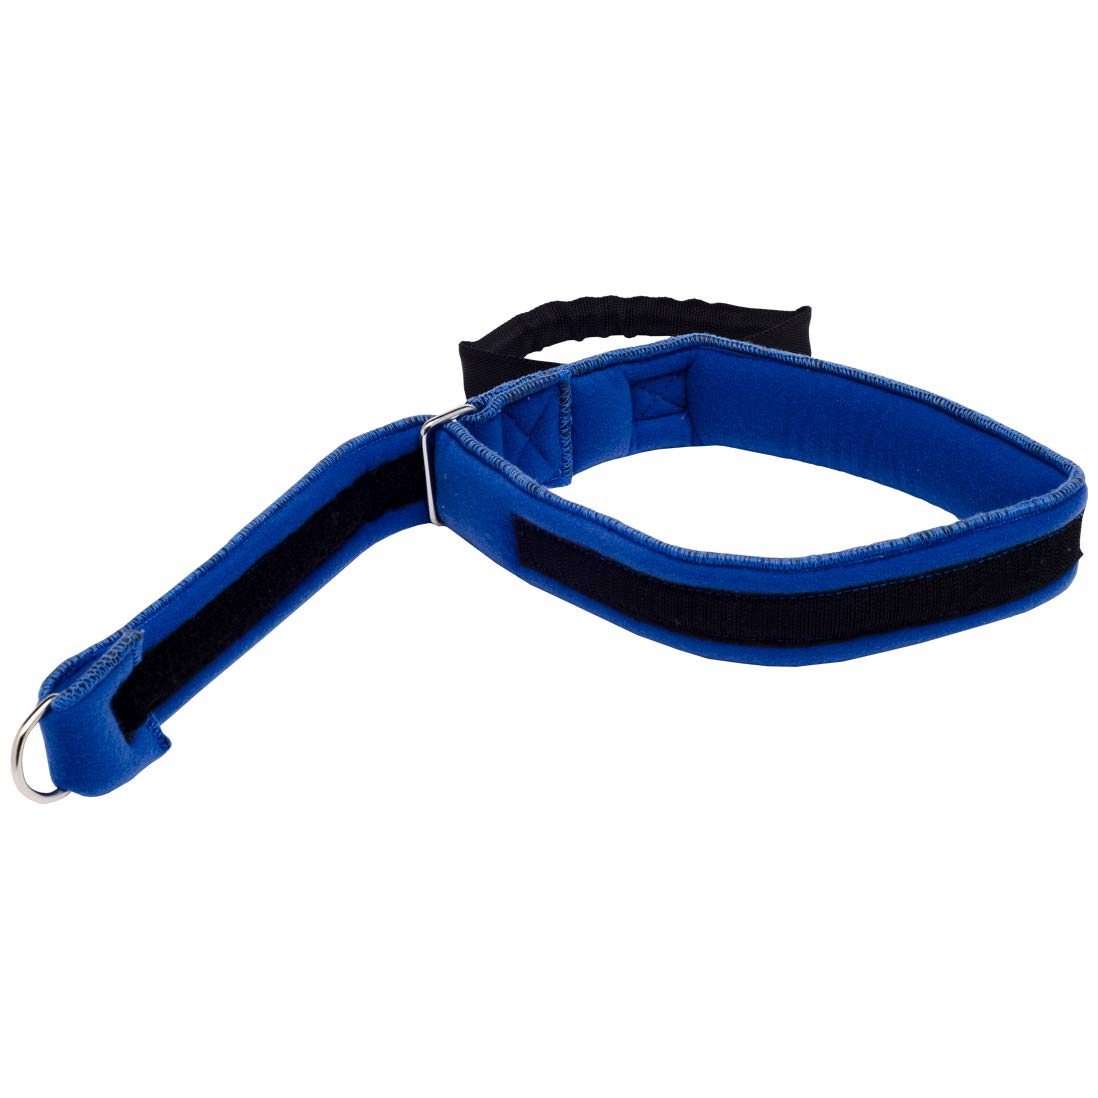 Leg Lifter Strap - Exercising and maneuvering aid - Able Medilink